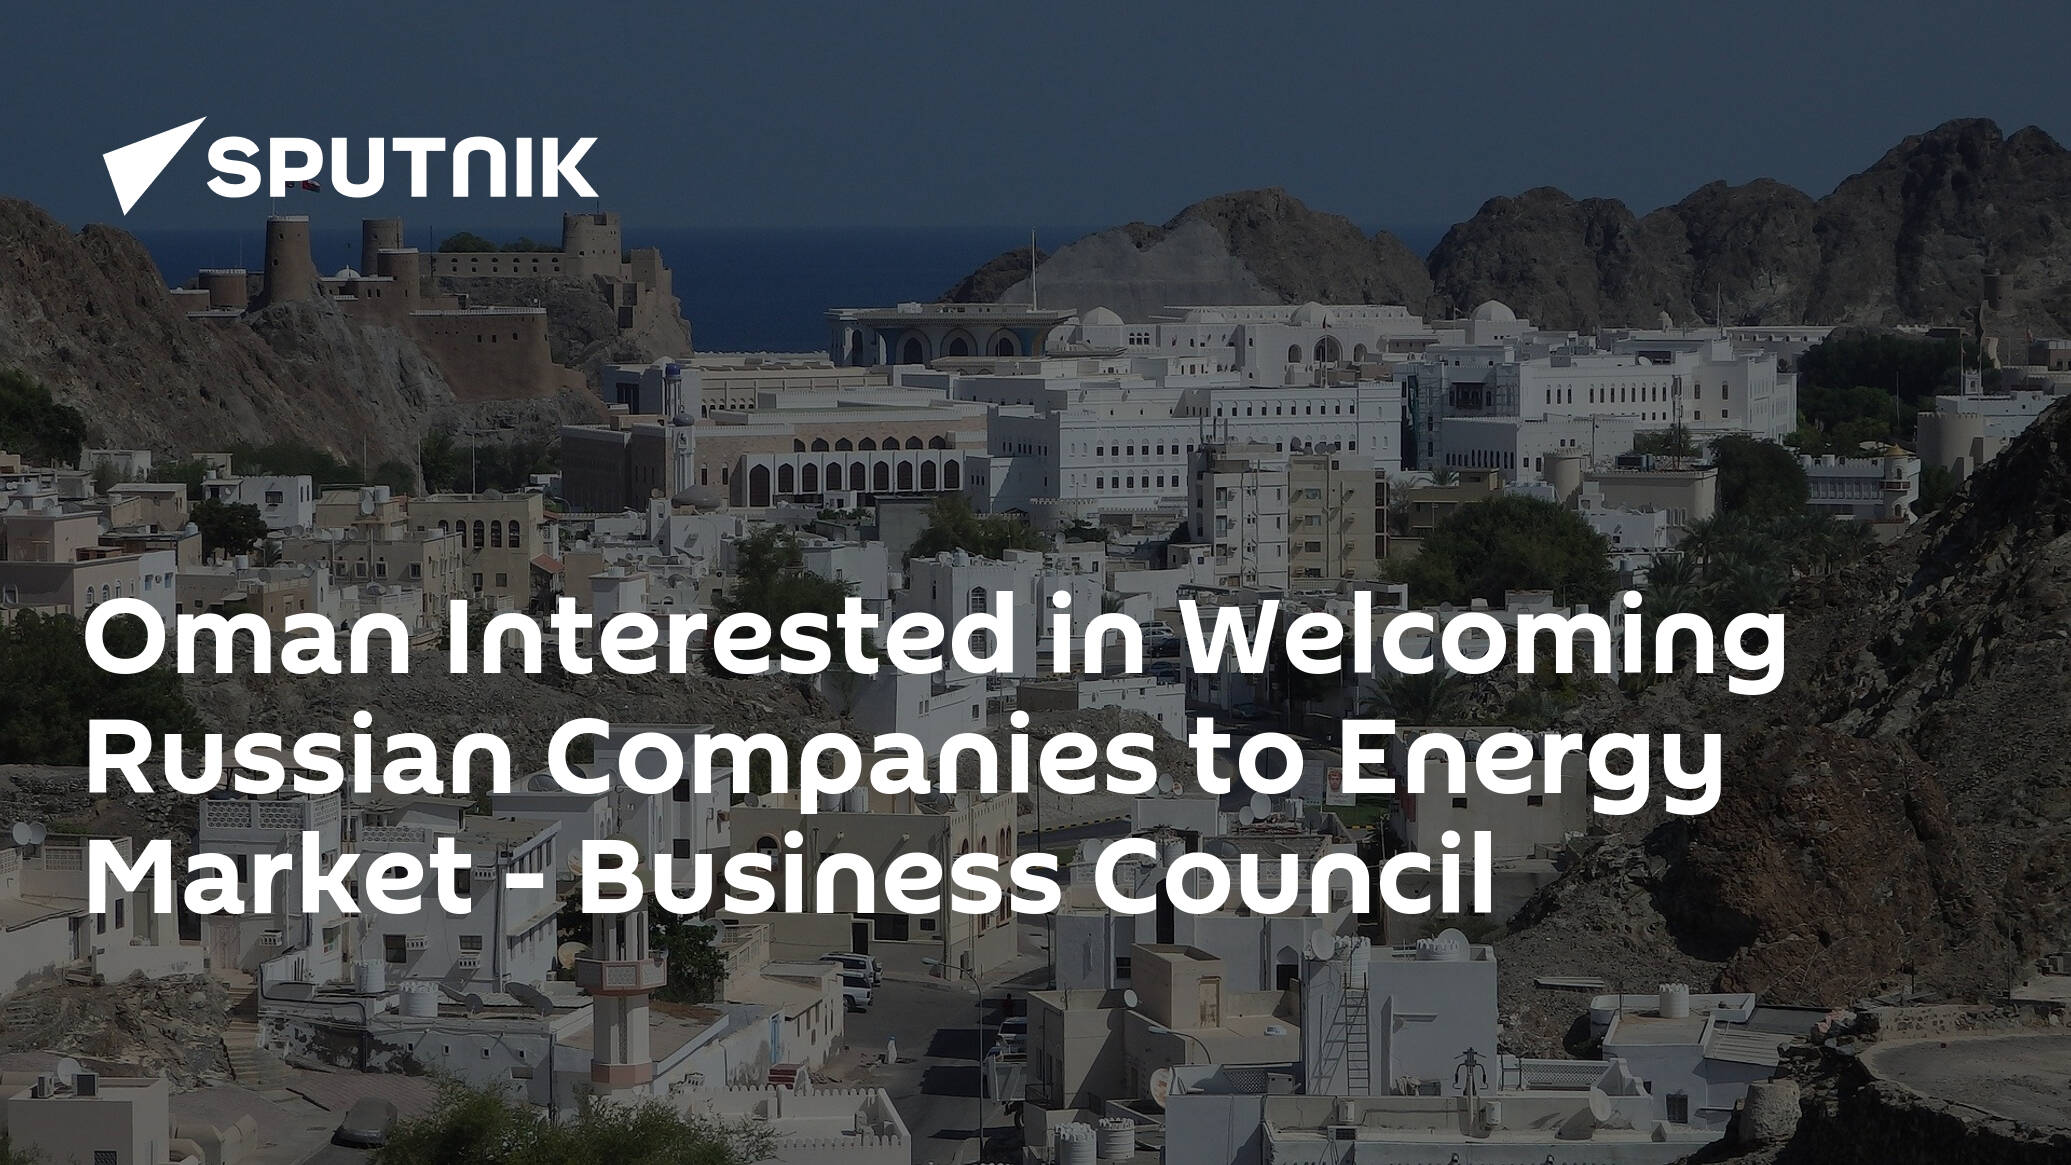 Oman Interested in Welcoming Russian Companies to Energy Market – Business Council